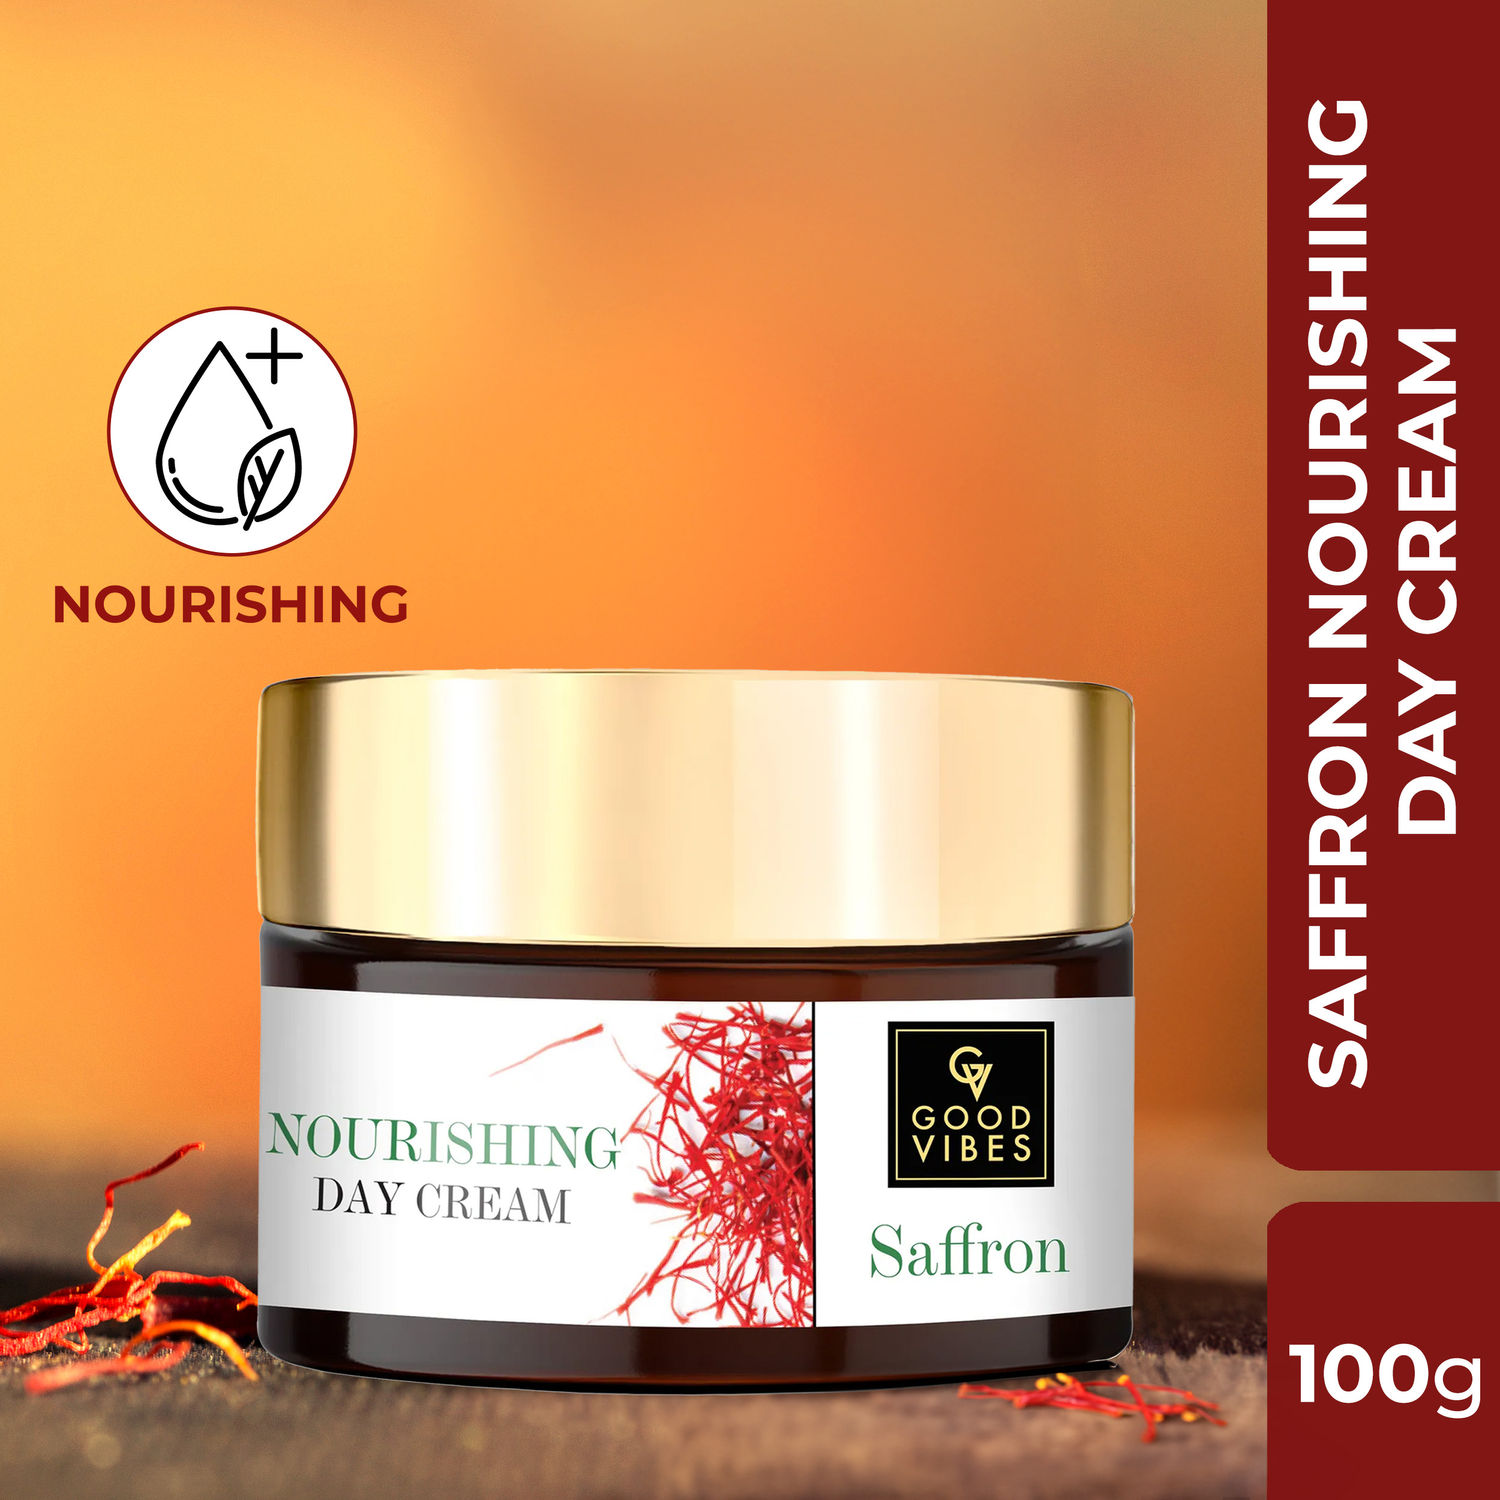 Buy Good Vibes Saffron Nourishing Day Cream | Hydrating, Glow | With Coffee | No Parabens, No Sulphates, No Mineral Oil, No Animal Testing (100 g) - Purplle